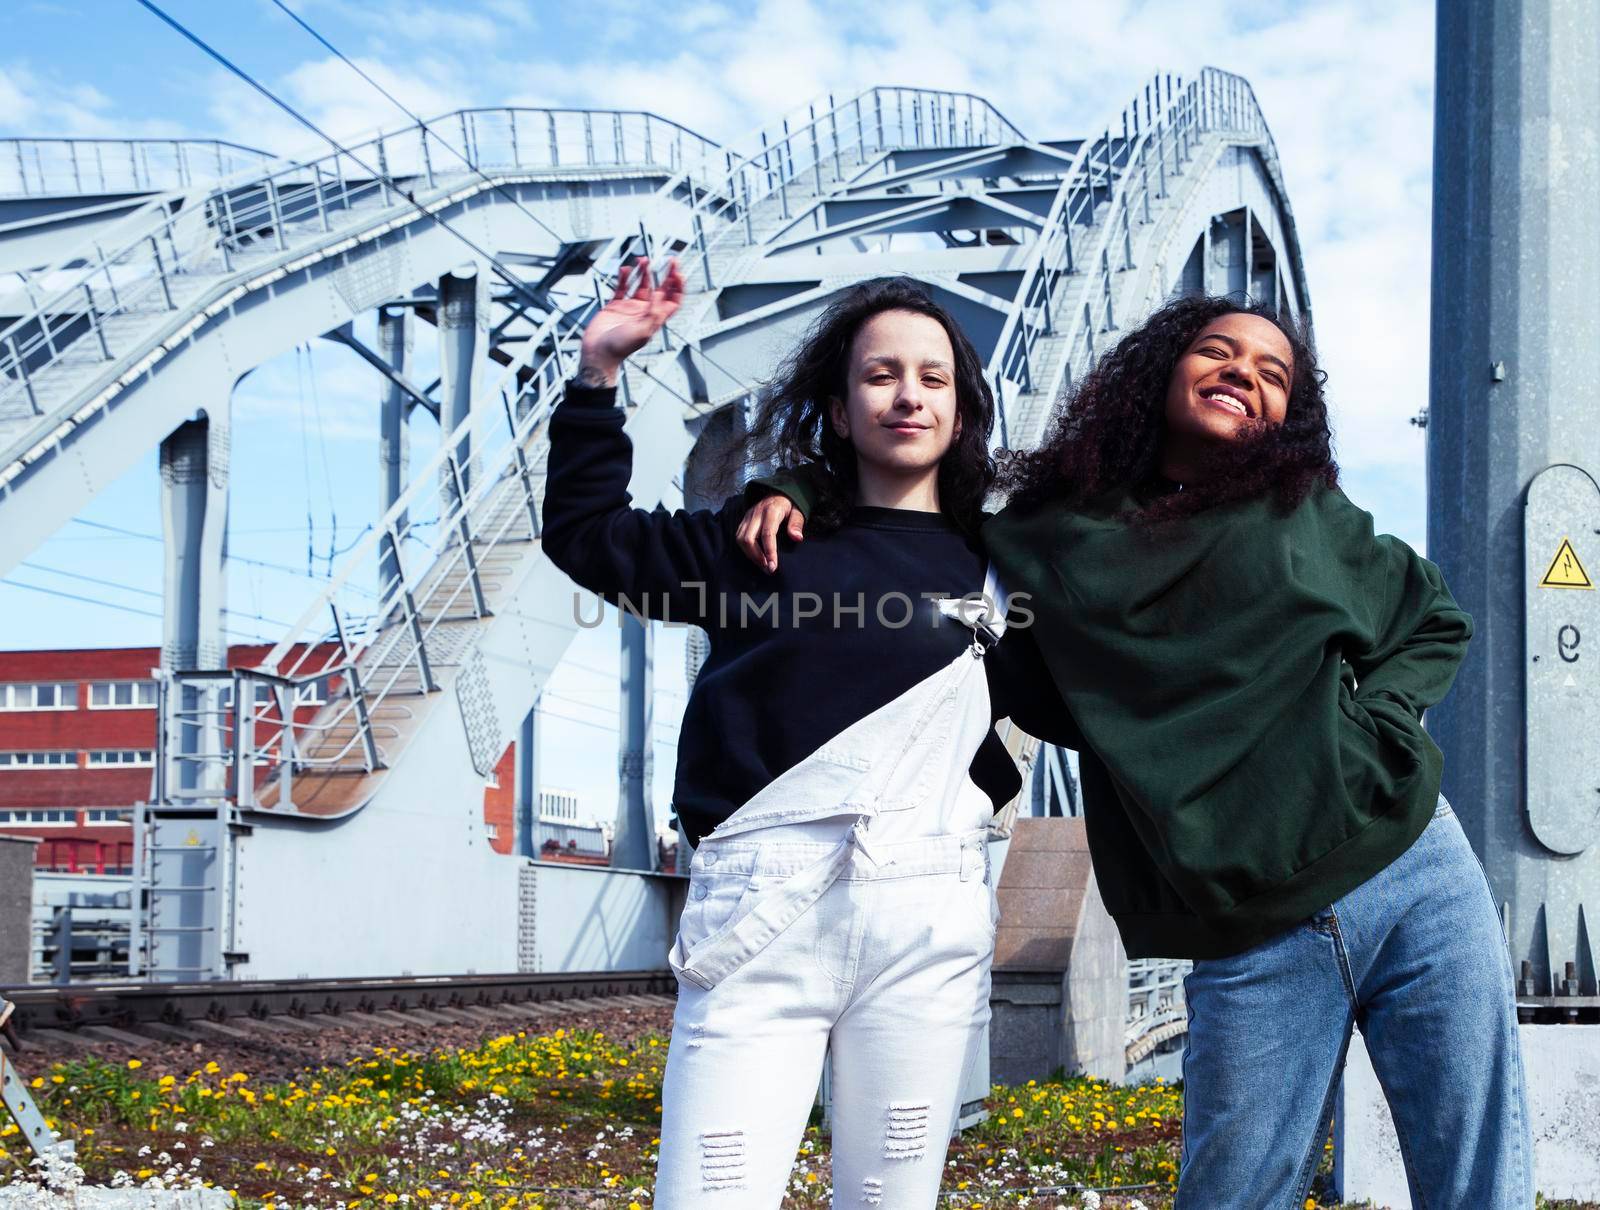 young cute teenage girls together in industrial zone happy smiling having fun, big city lifestyle fashion people close up